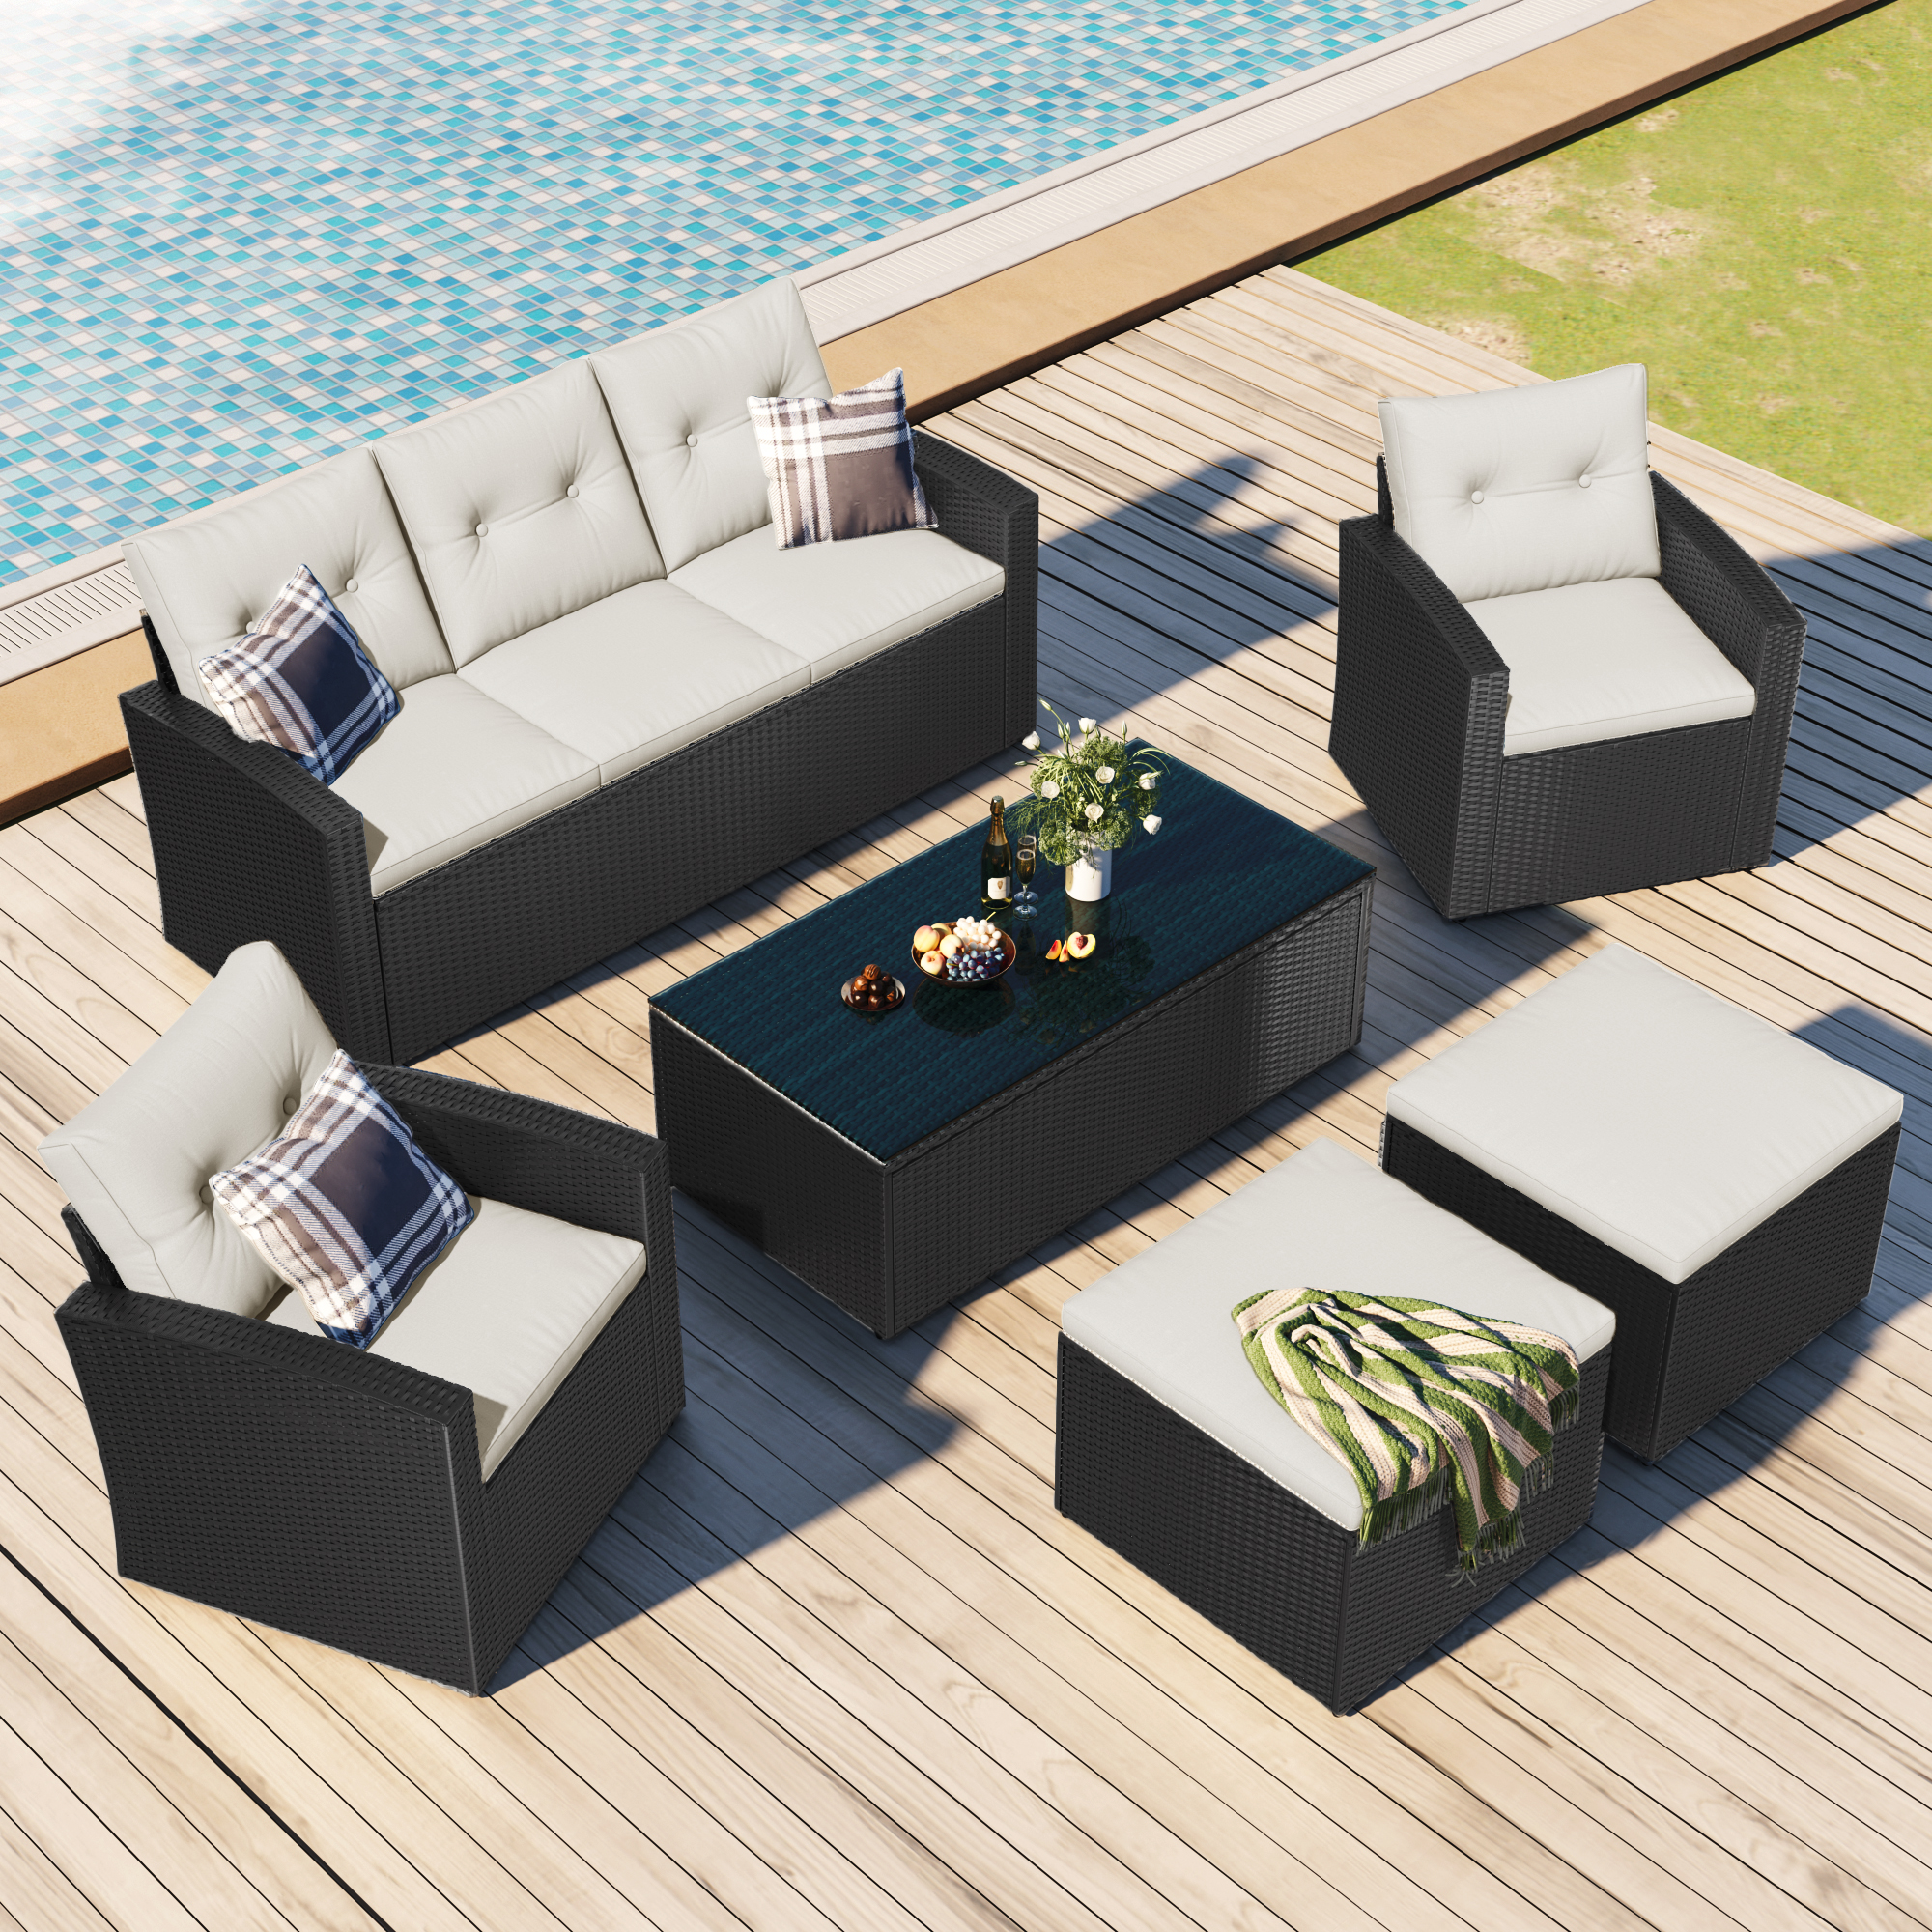 6 Piece Patio Sectional Sofa Set, Outdoor Conversation Set, All-Weather Wicker Sectional Seating Group with Cushions & Coffee Table, Modern Furniture Couch Set for Patio Deck Garden Pool, Beige - image 2 of 9